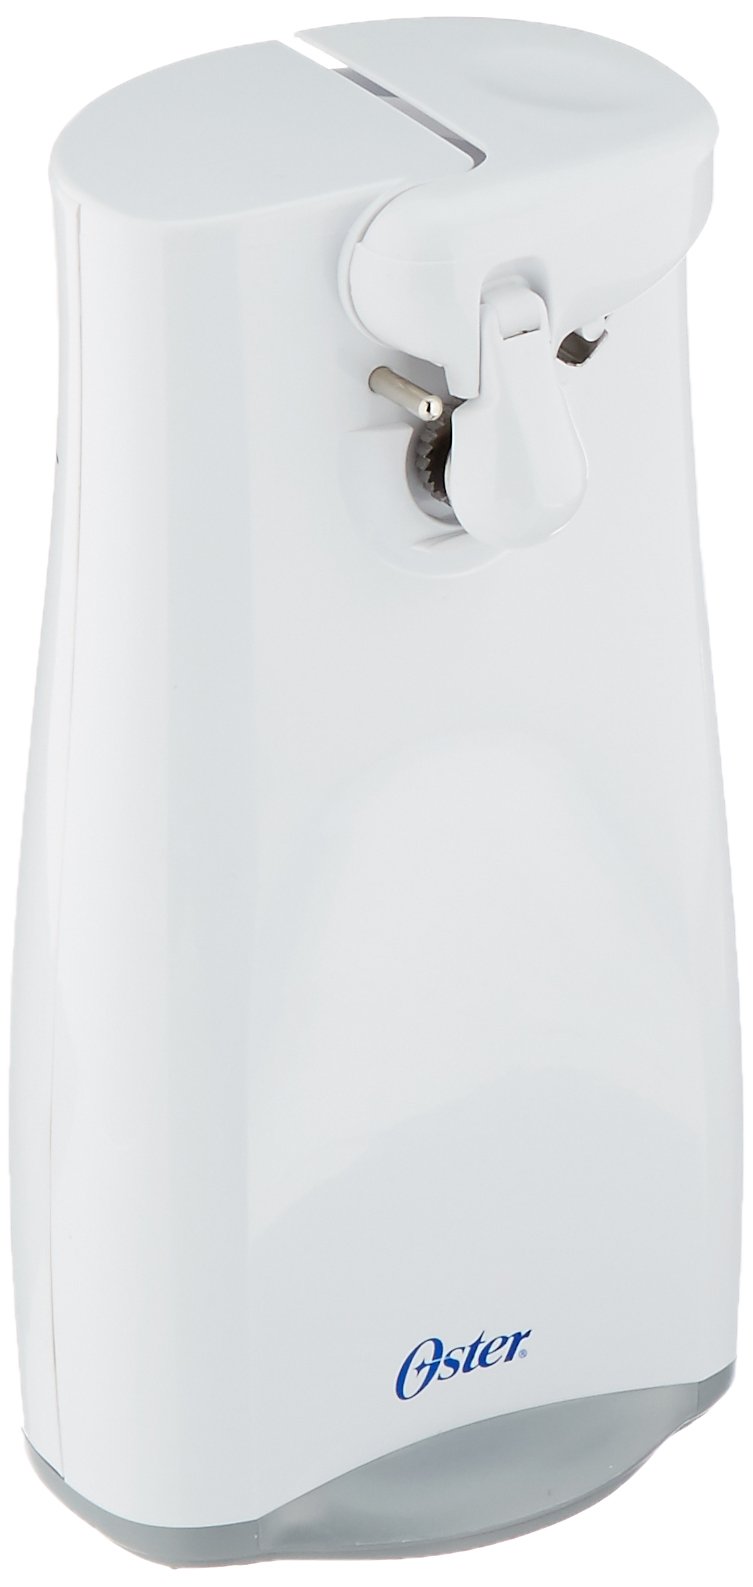 Oster 3125 Electric Can Opener, 220 Volts (Not for USA),White